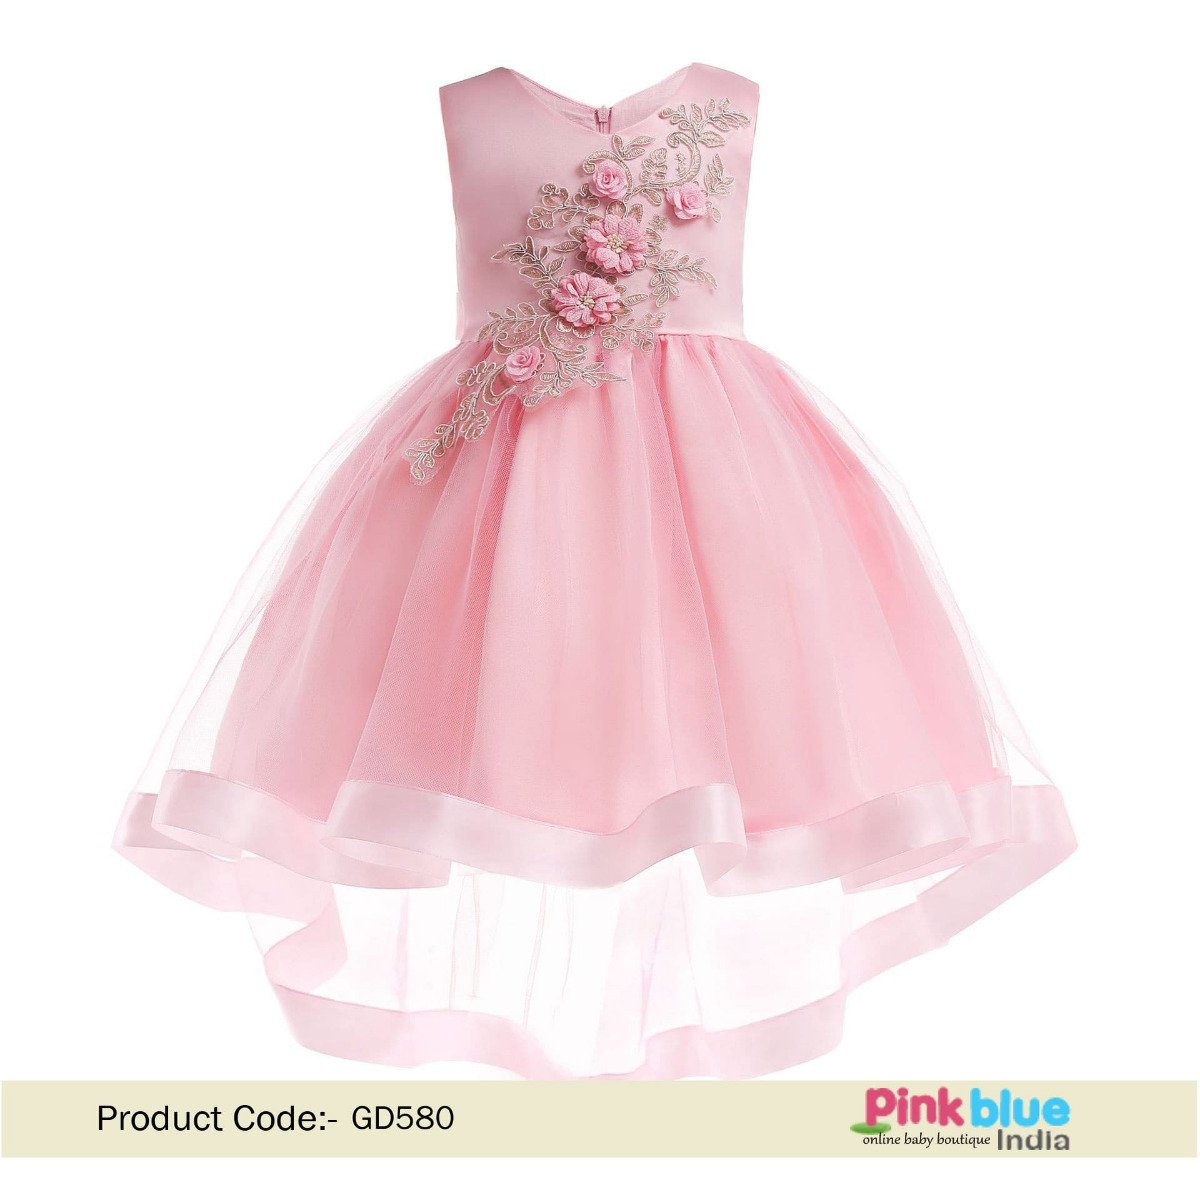 Pink Frock - Buy Pink Party Dress for Baby Girl Online